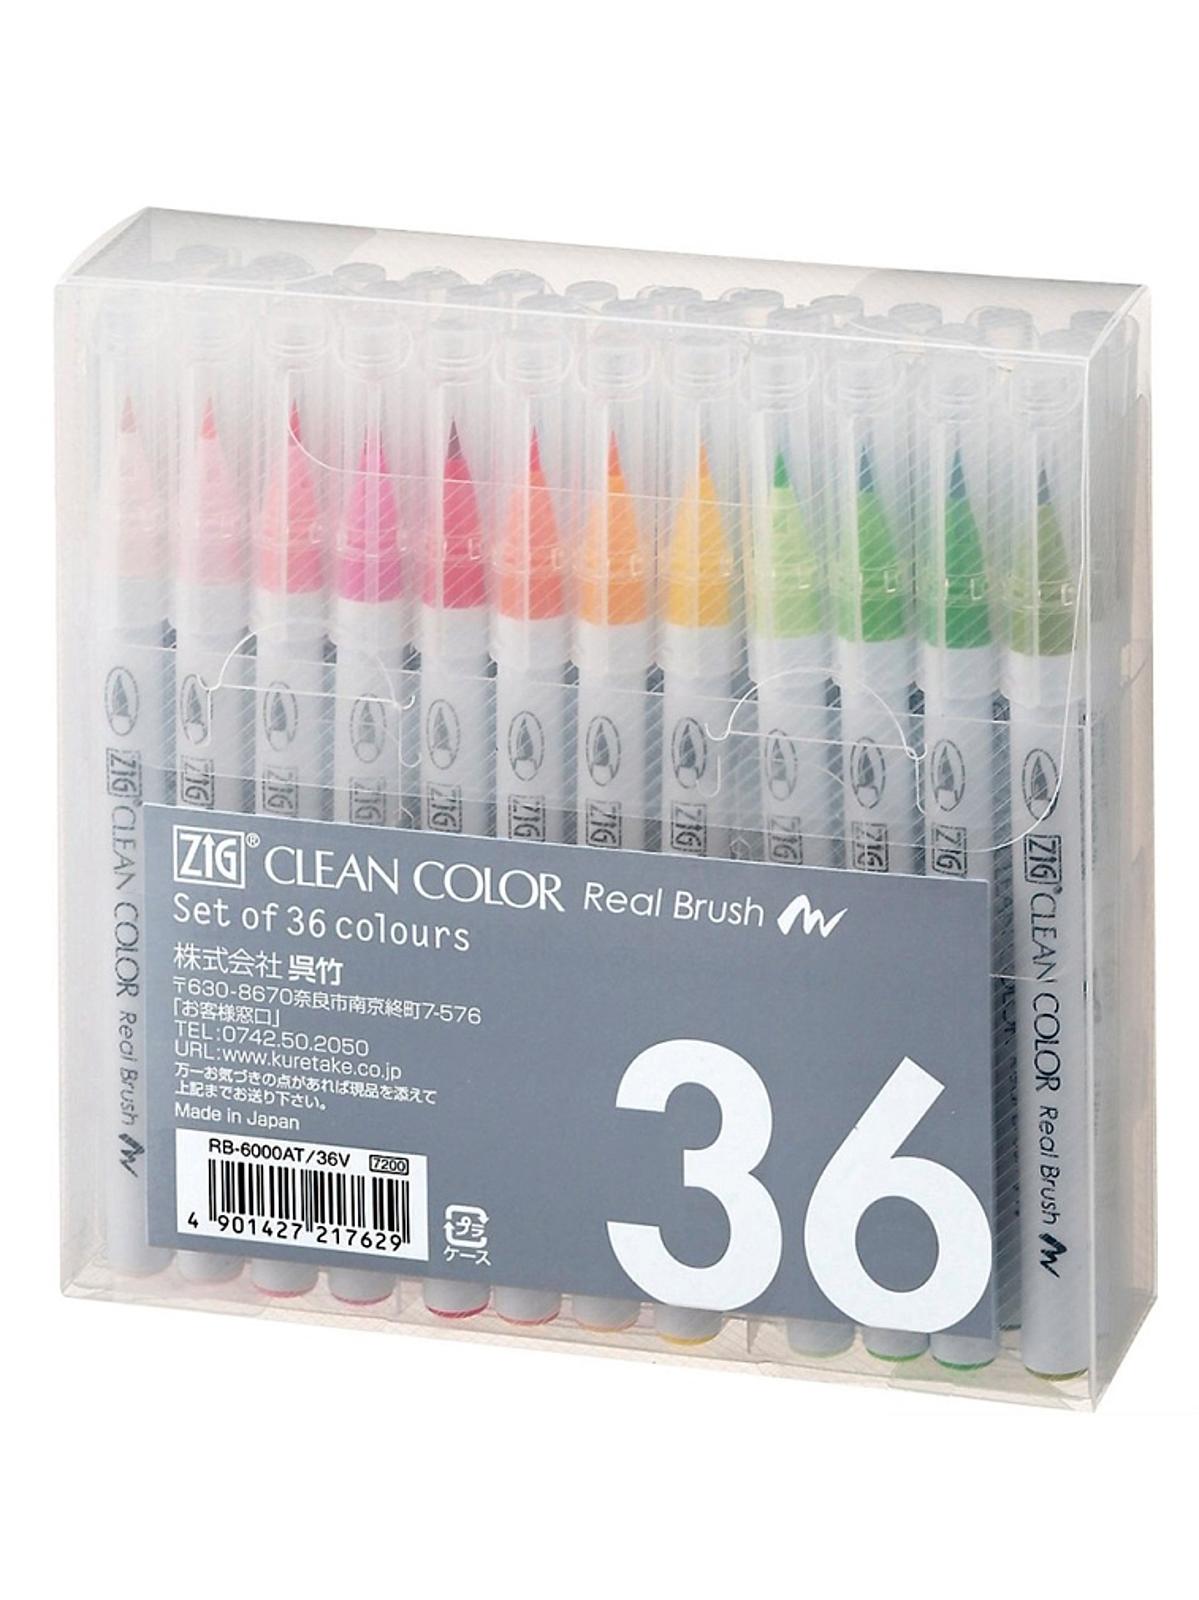 Clean Color Real Brush Sets Set Of 36